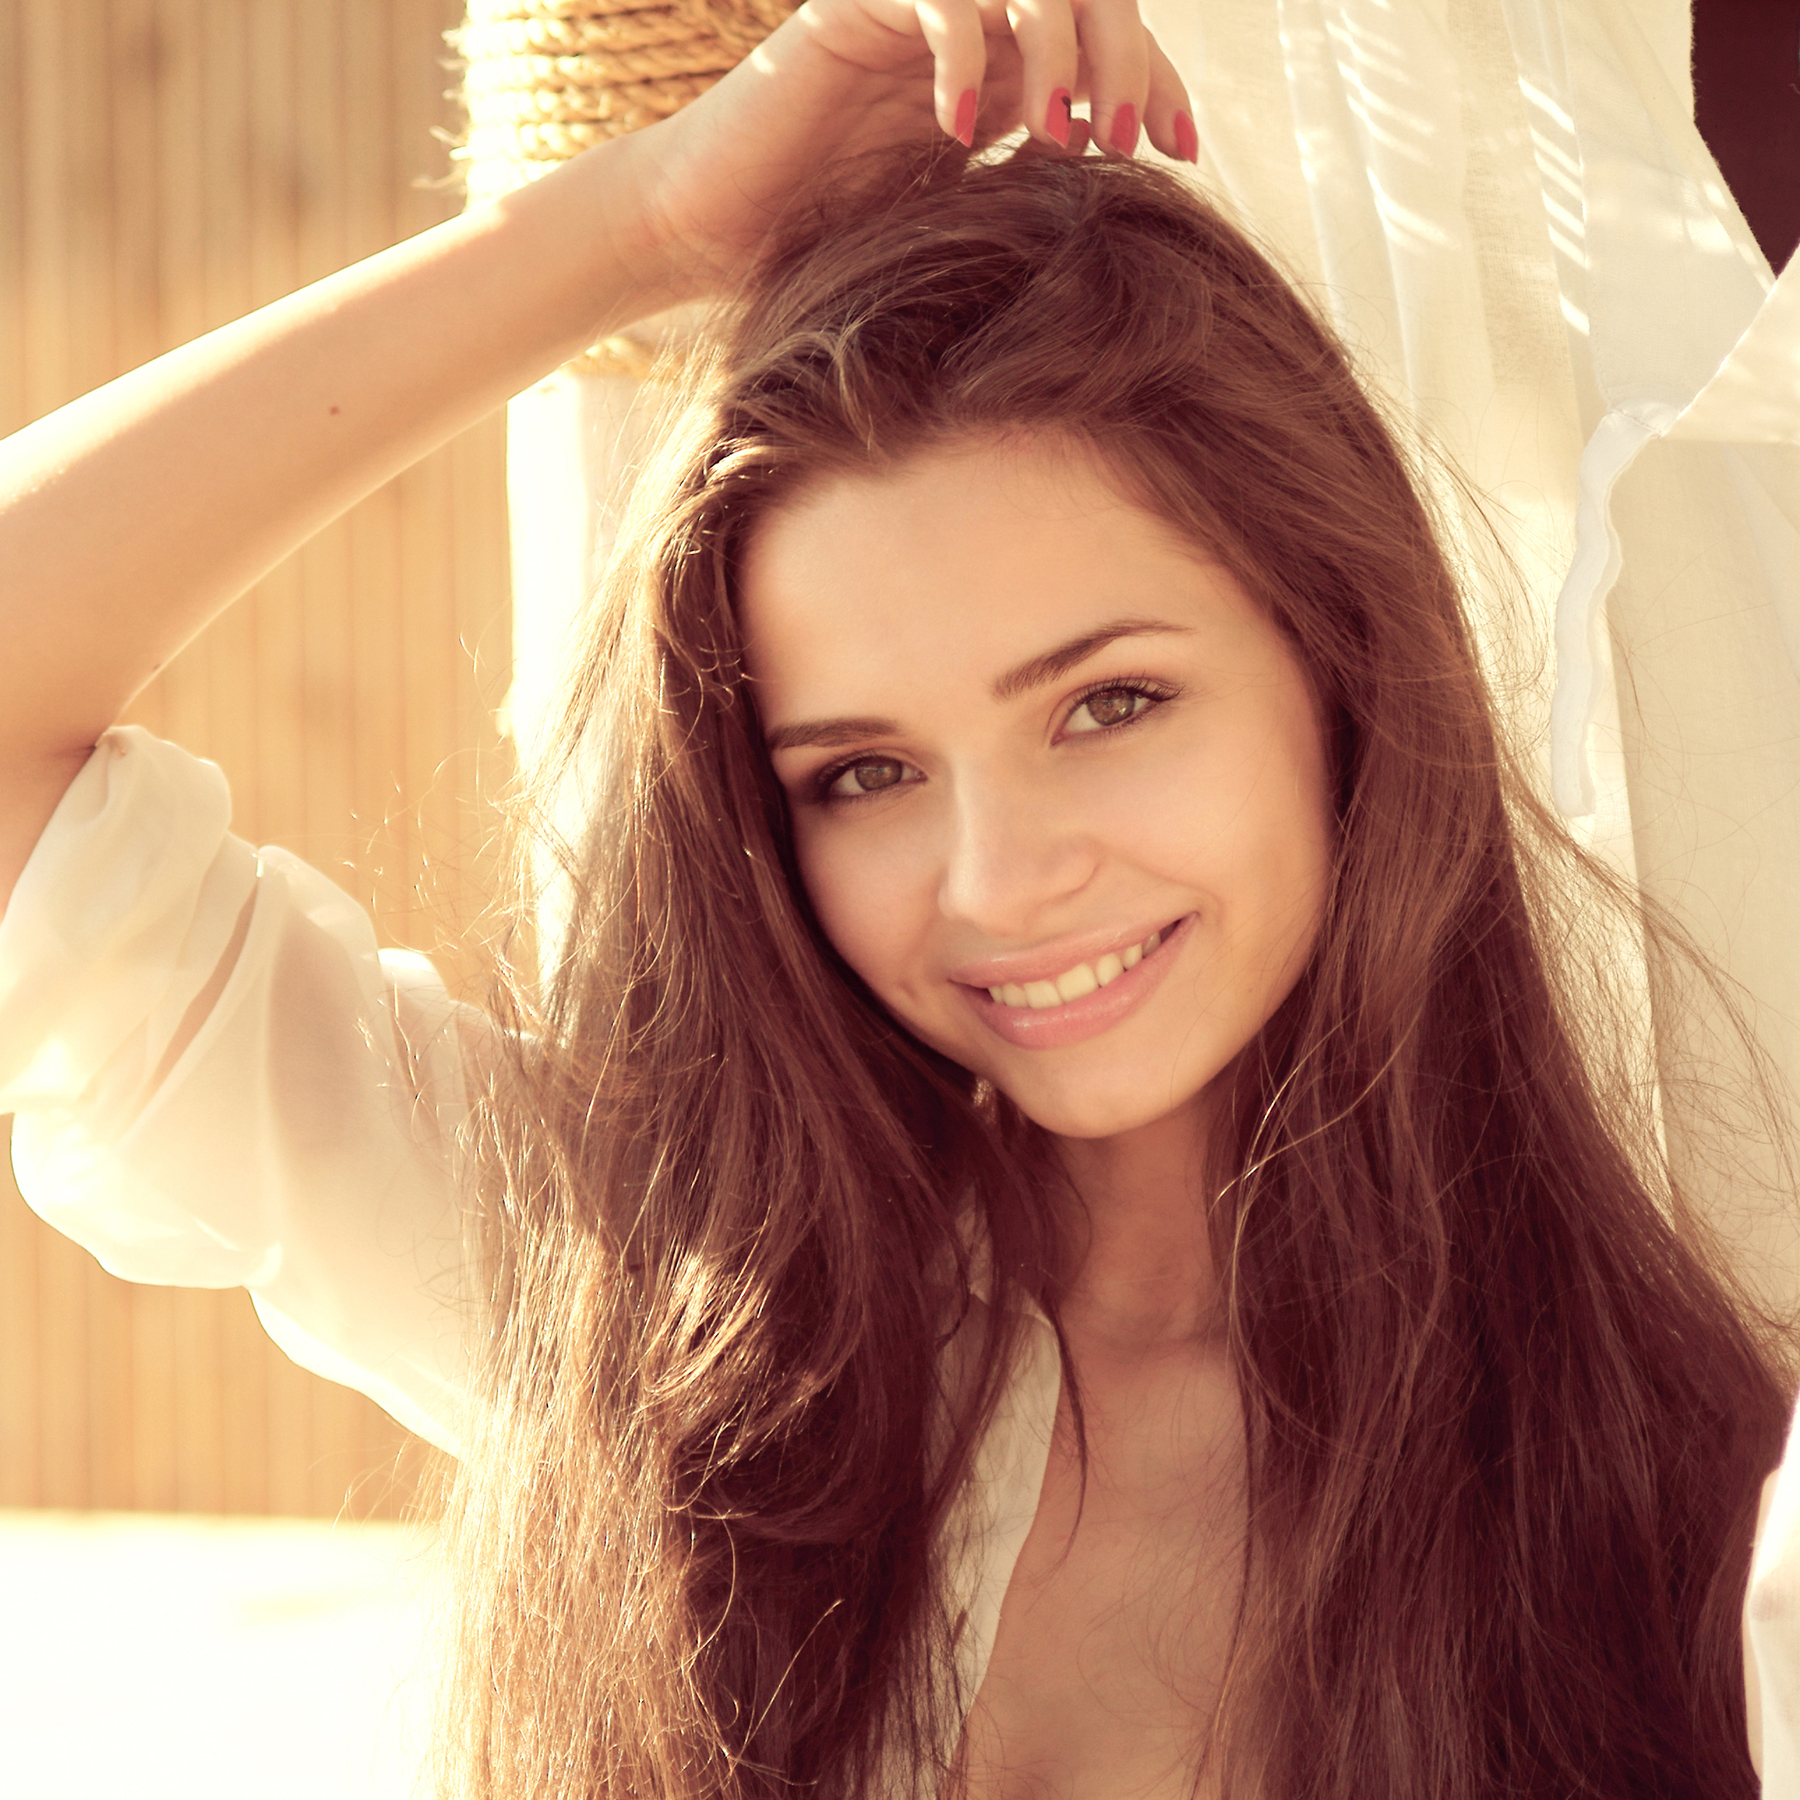 freegreatpicture-com-52471-shoulder-length-hair-beauty-with-a-smile-the-characters